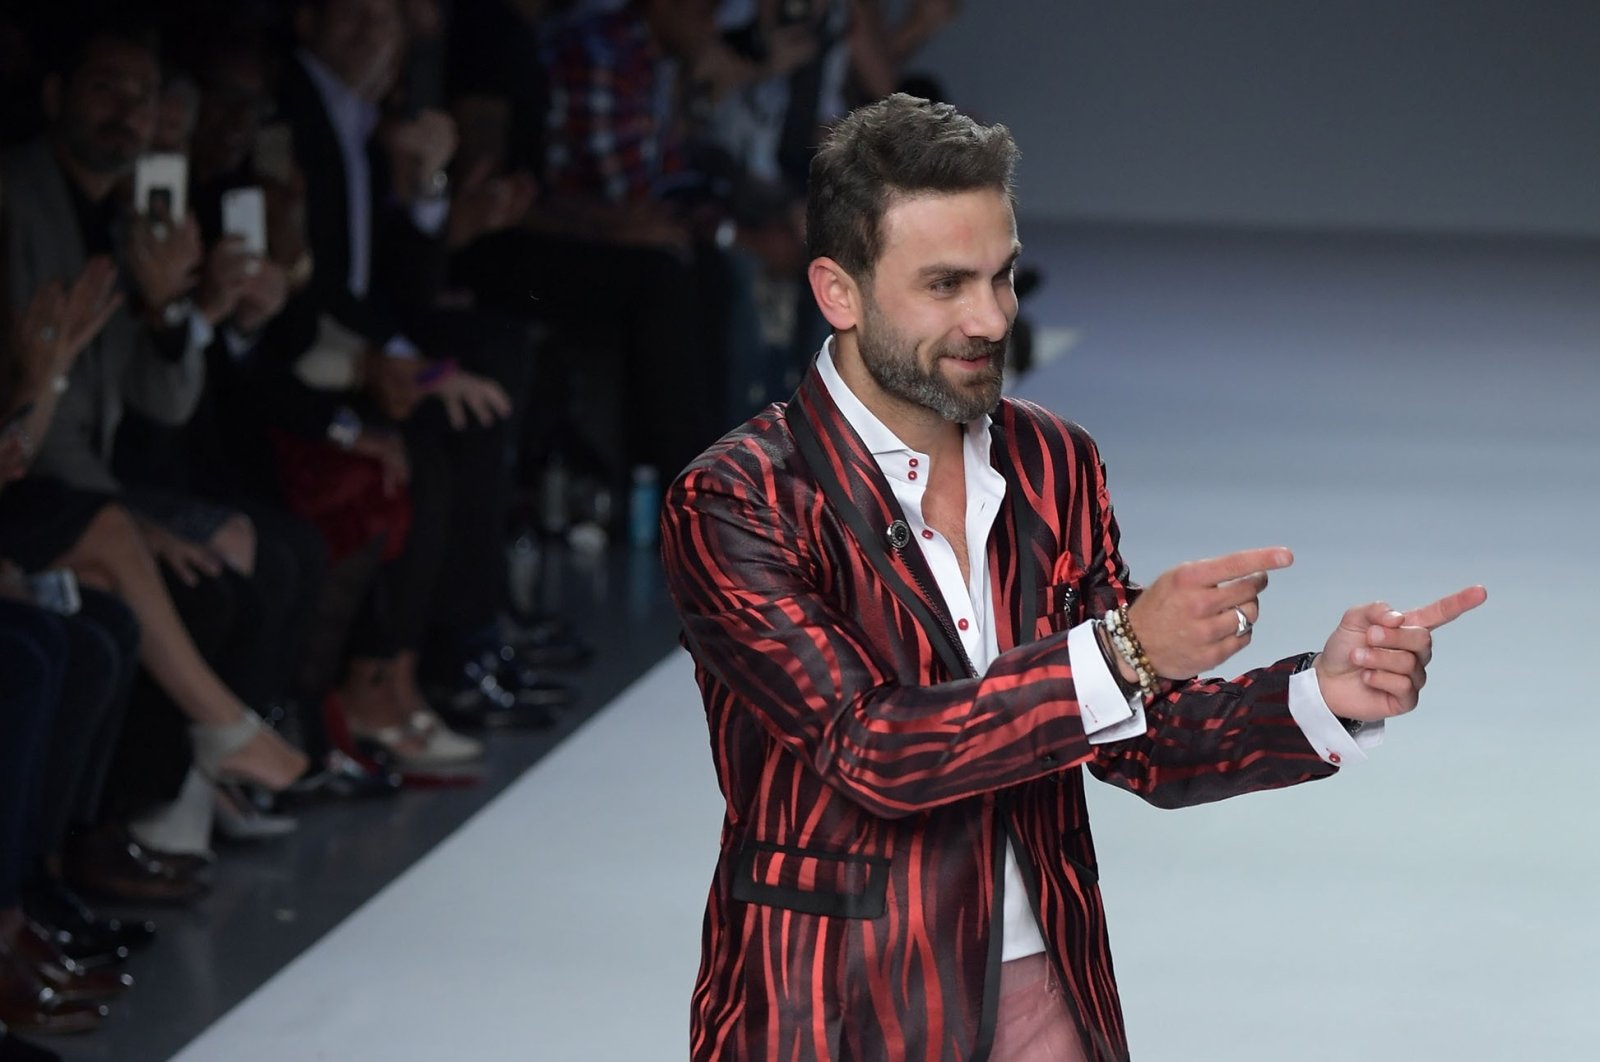 Designer Peyman Umay greets the audience after a fashion show during New York Fashion Week, New York, U.S., Sept. 7, 2017. (Shutterstock Photo)